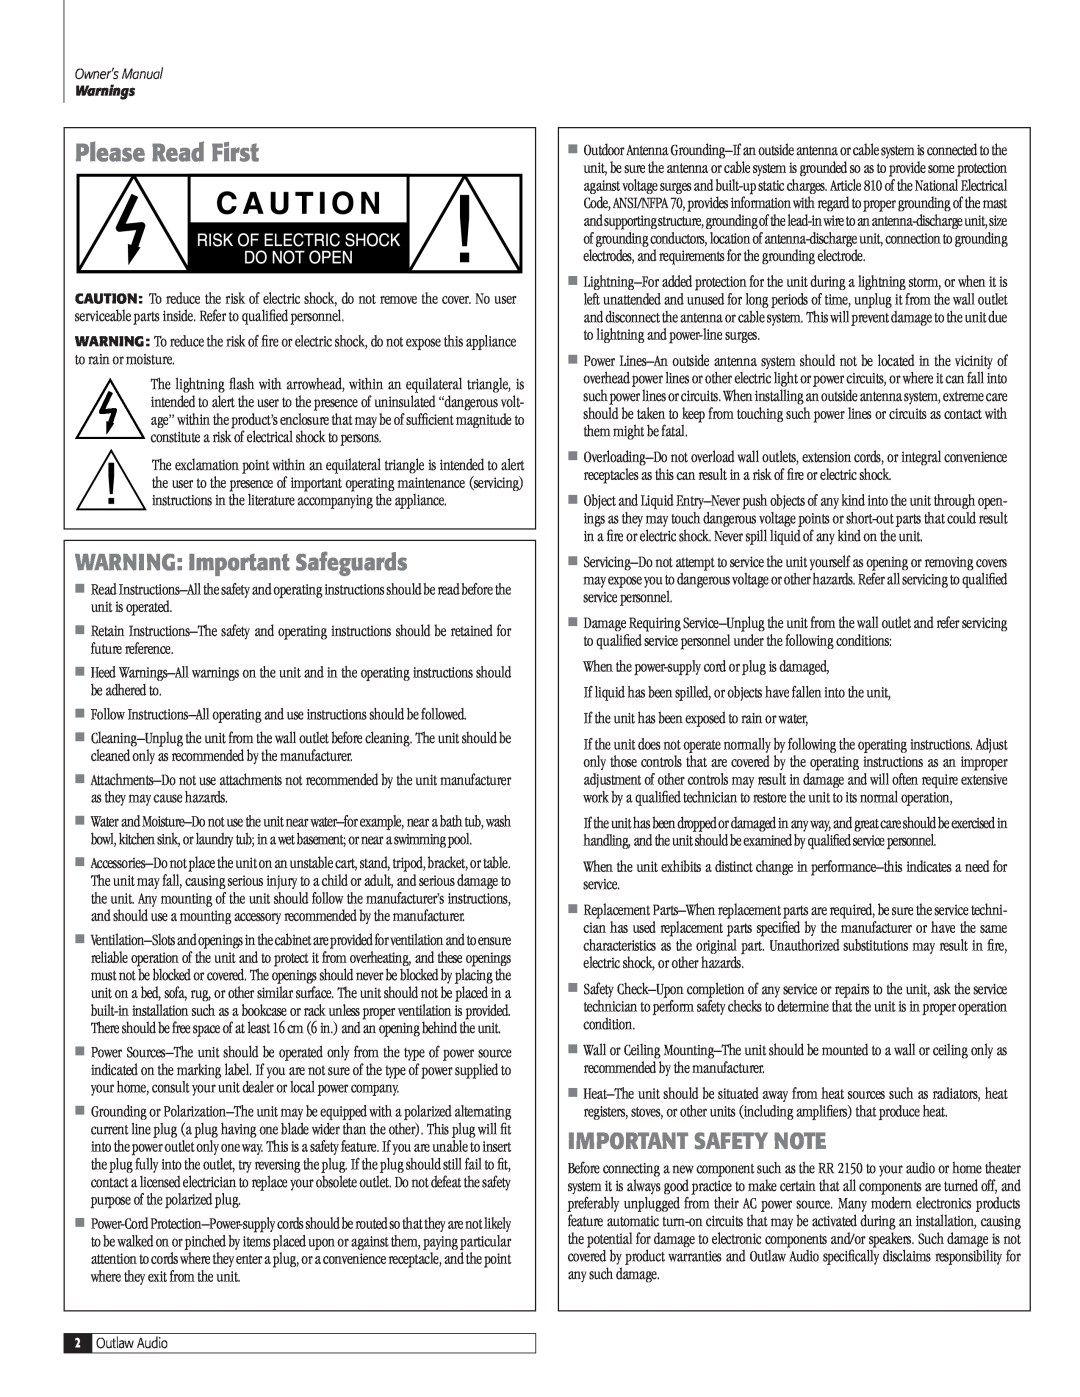 Outlaw Audio RR 2150 owner manual Please Read First, WARNING Important Safeguards, Important Safety Note 